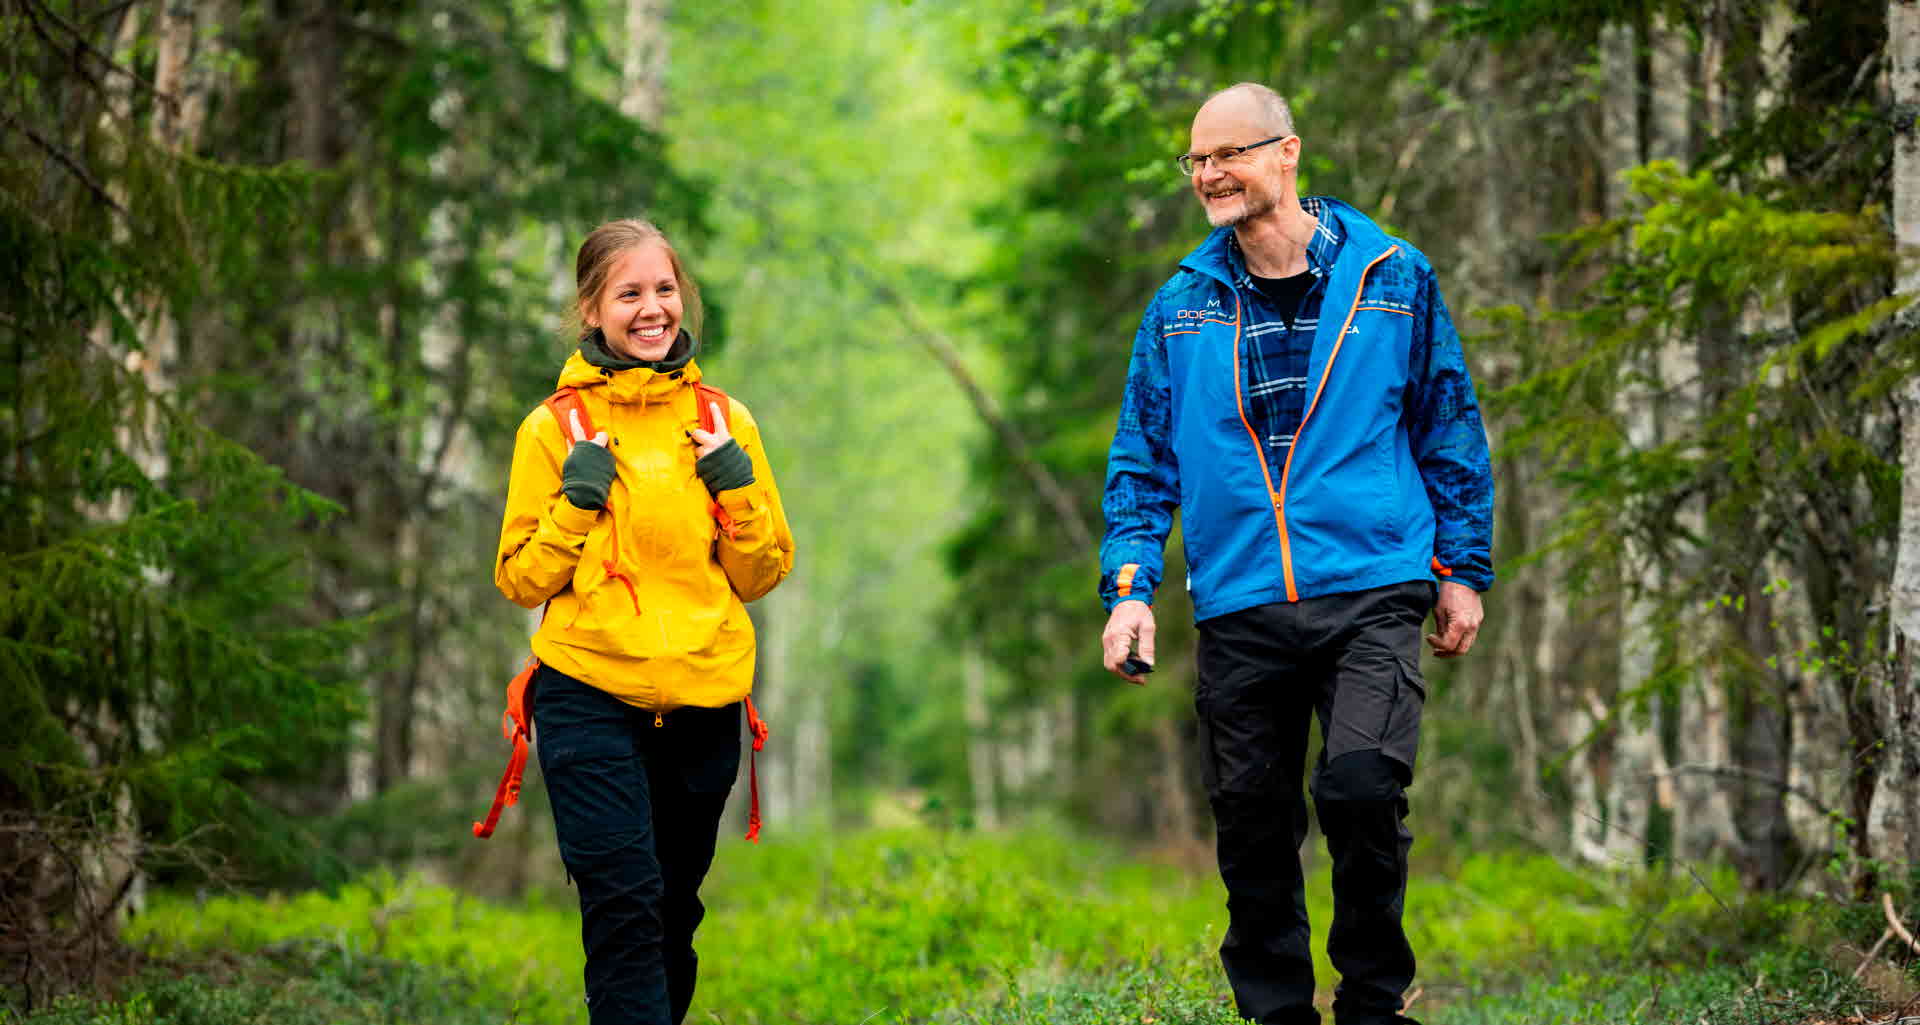 Two people walking in a forest, seen from the front.